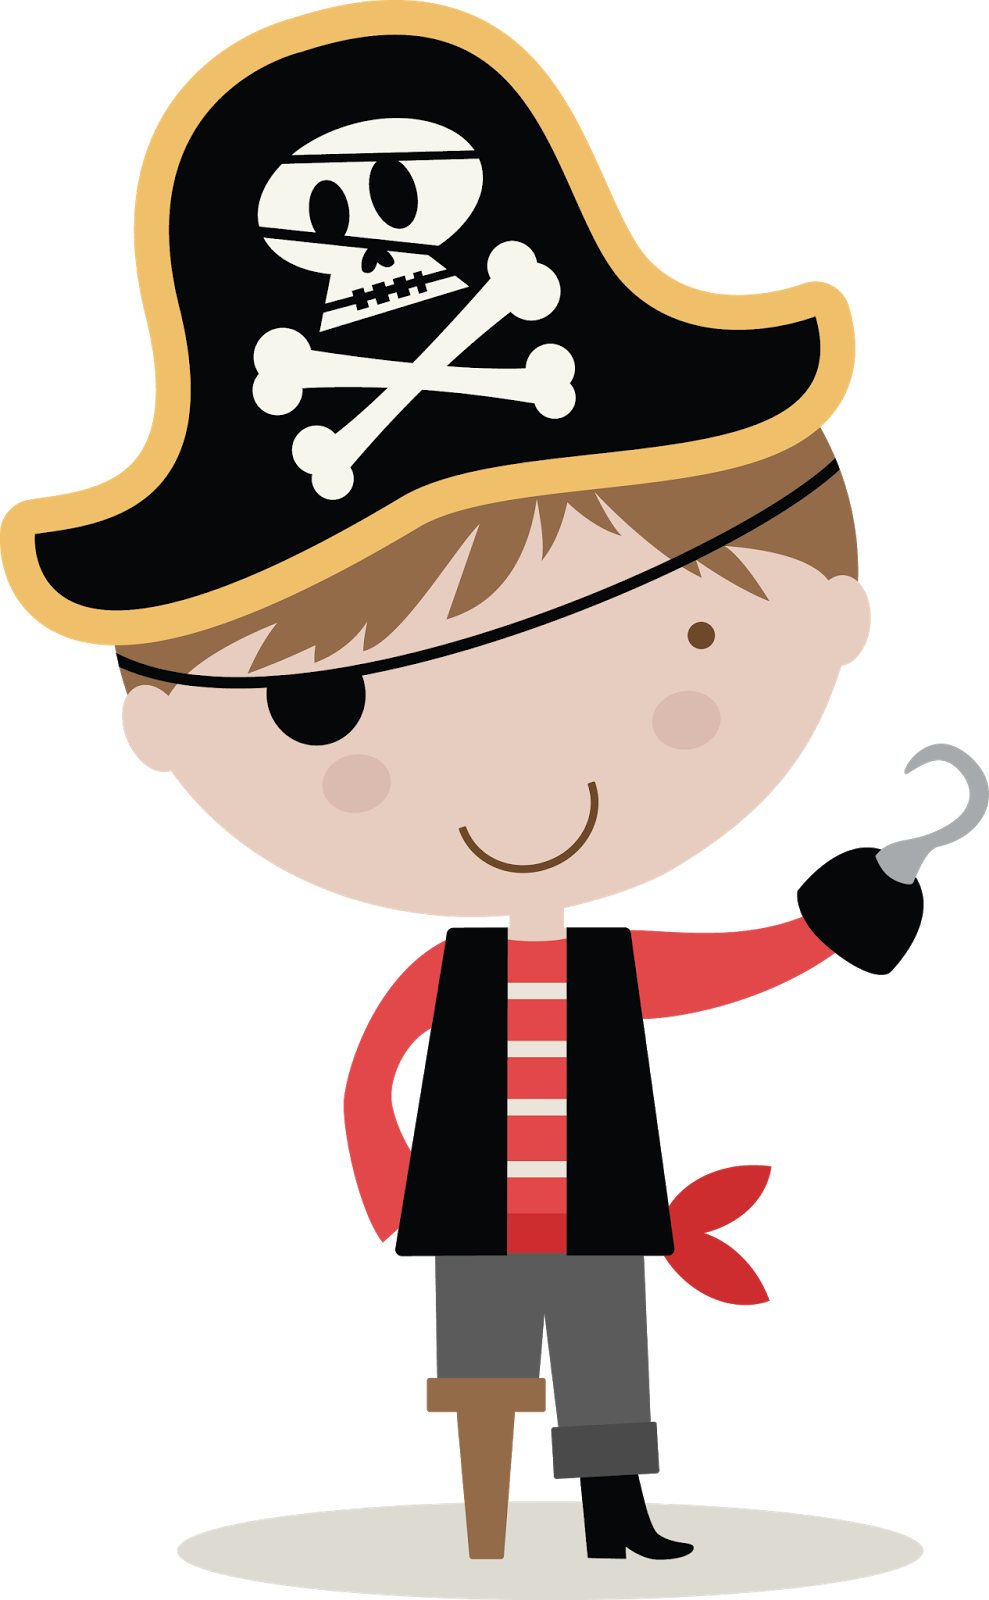 free clipart images pirates - photo #39